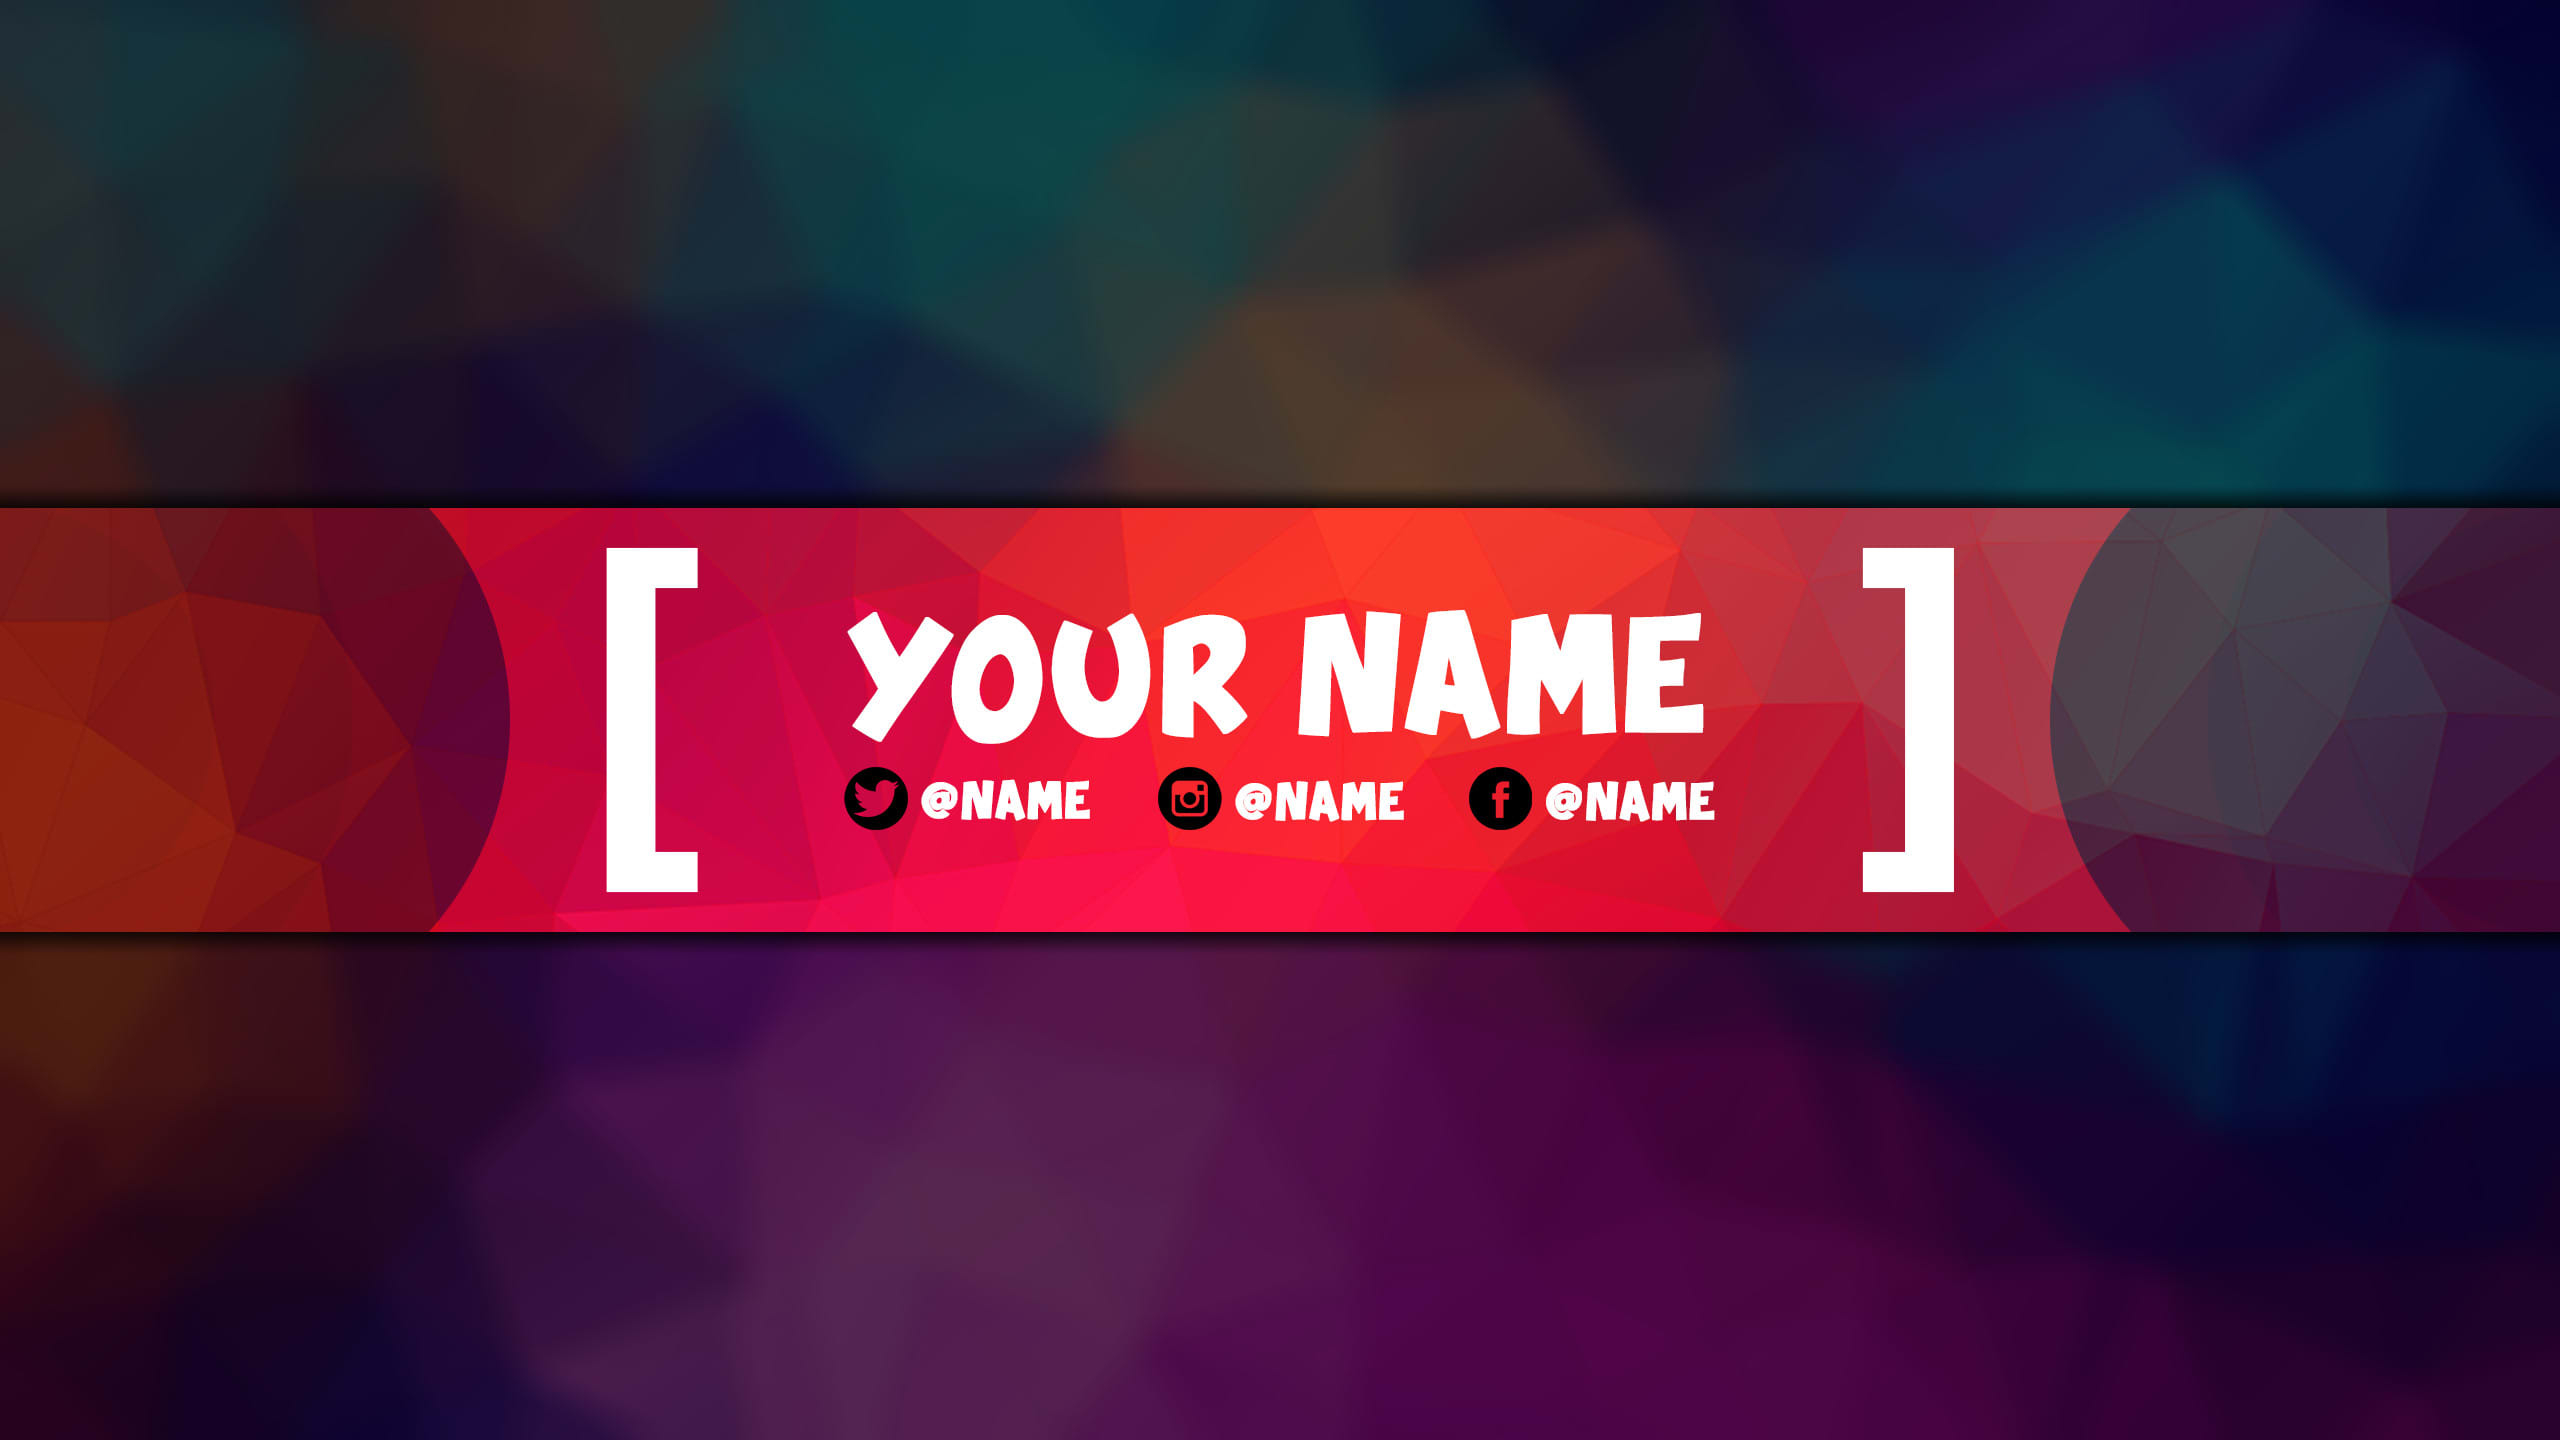 Youtube Banners Template - Best Professional Template